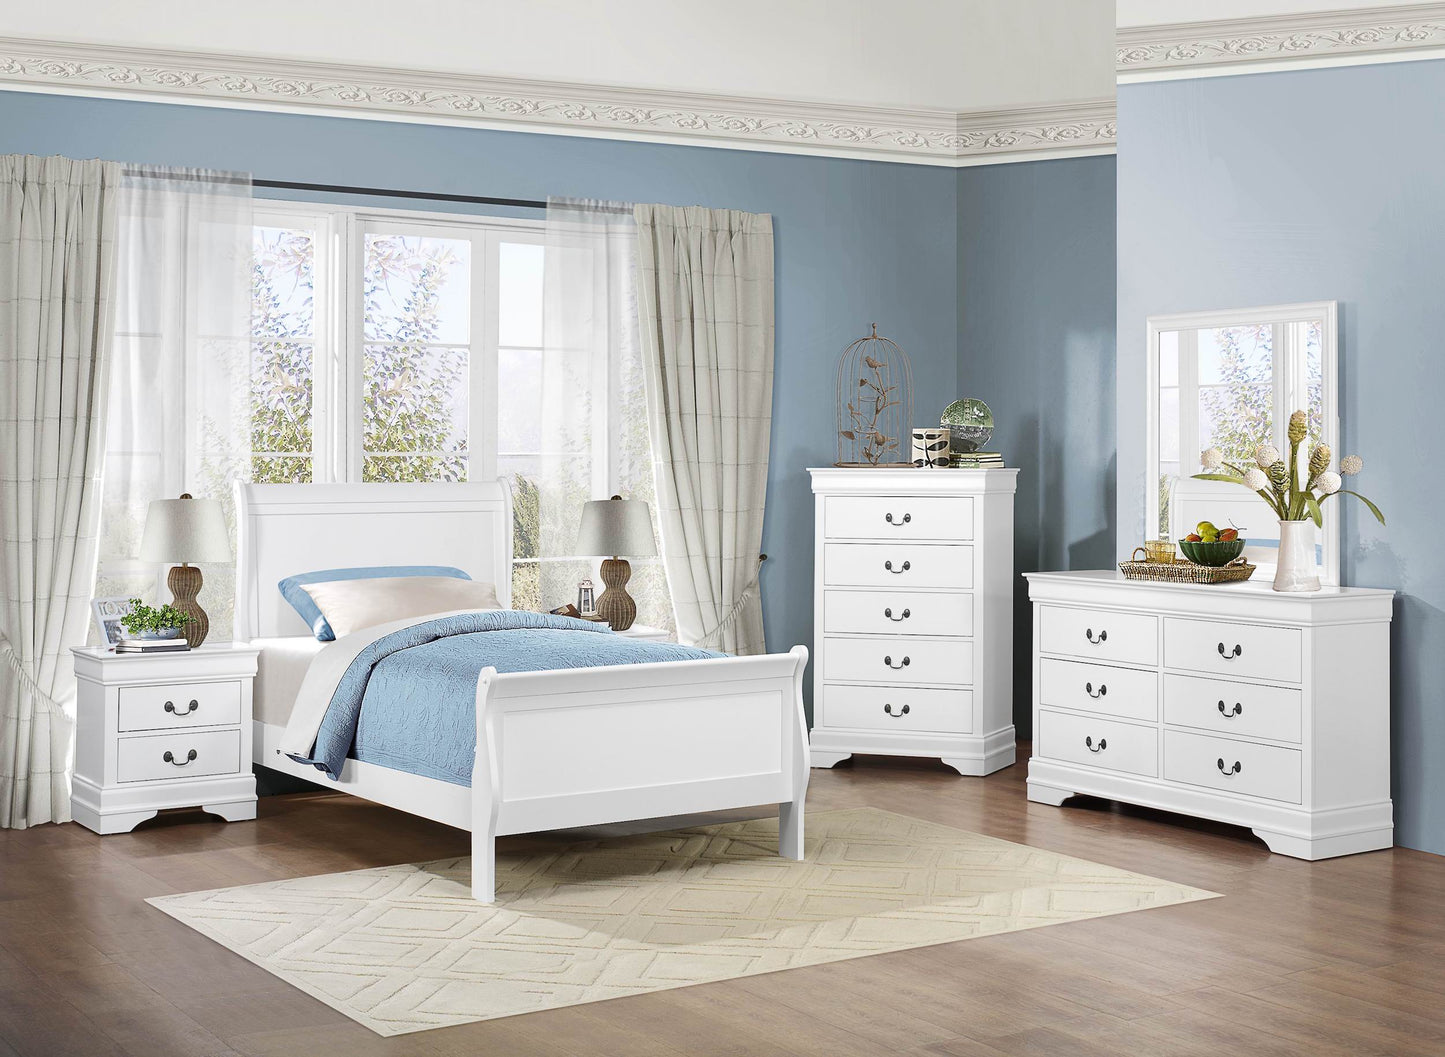 Manburg Louis Philippe 4PC Bedroom Set Full Sleigh Bed, Dresser, Mirror, Nightstand in Burnished White